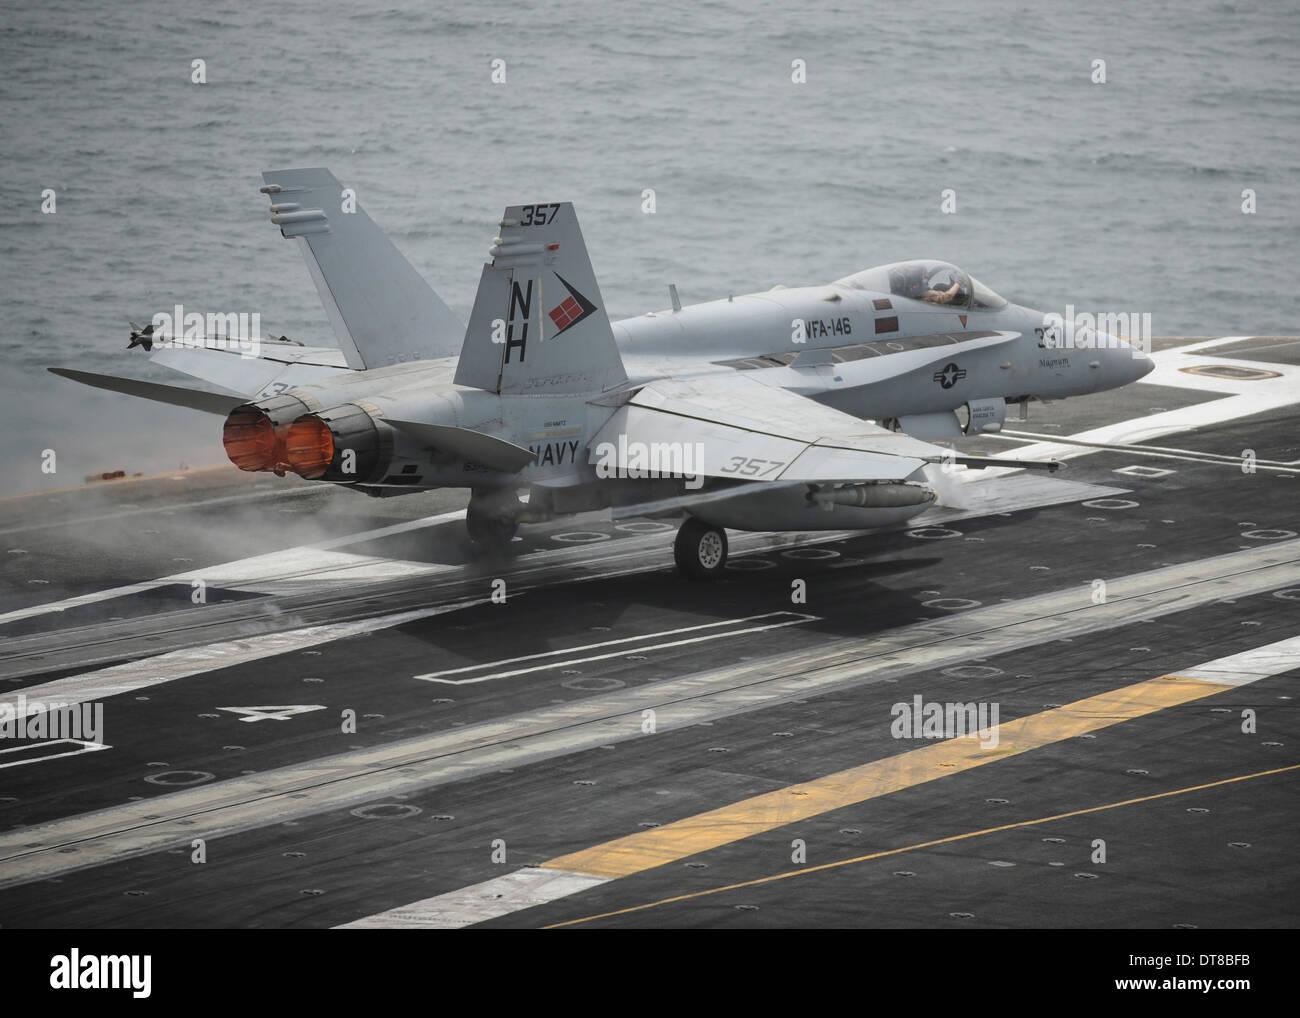 August 15, 2013 - An F/A-18C Hornet launches from the aircraft carrier USS Nimitz. Stock Photo